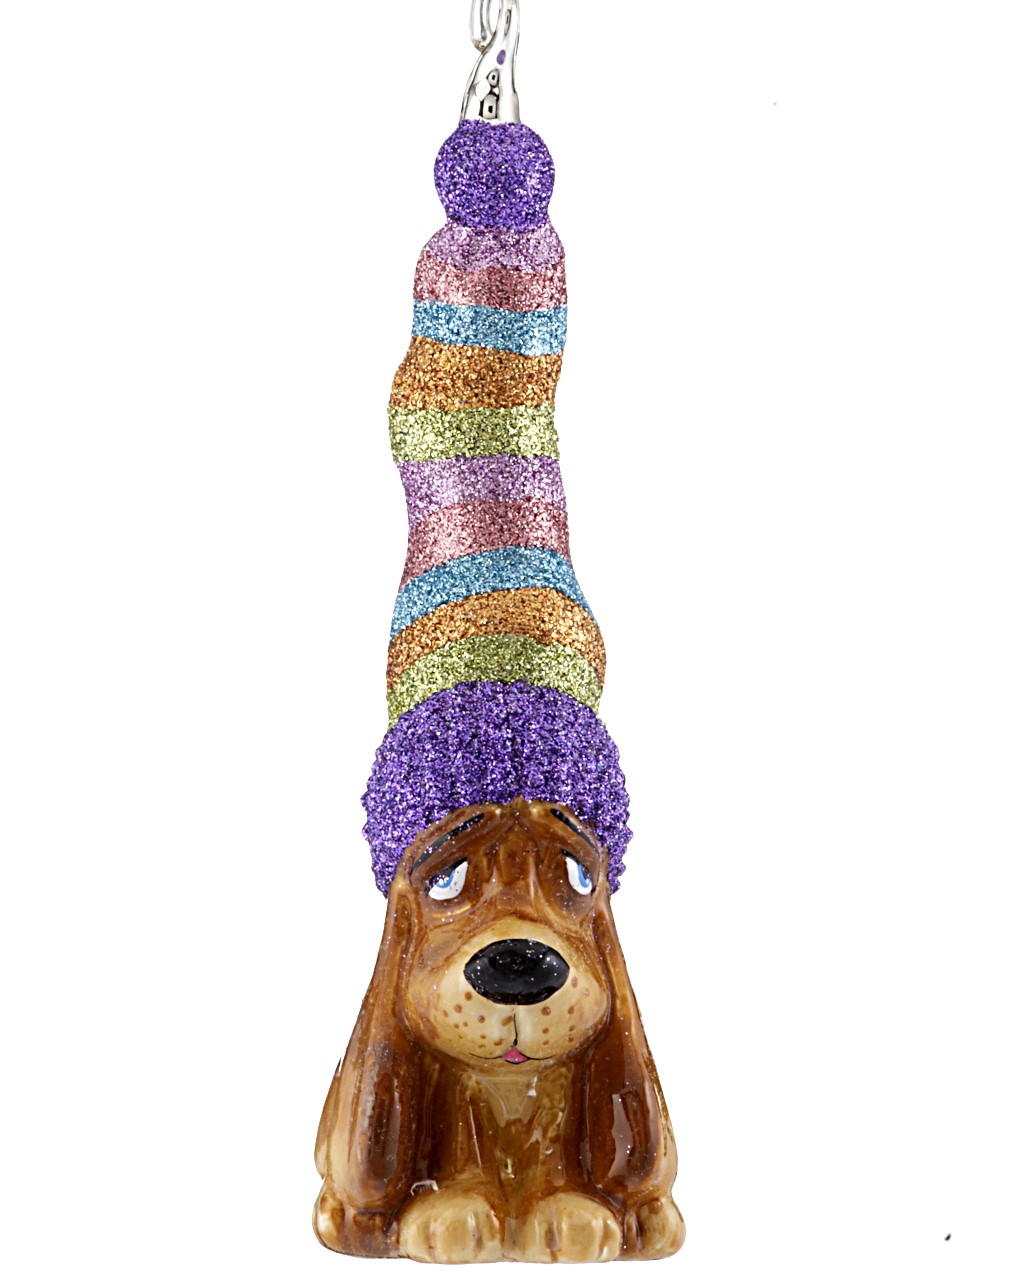 A funny dog Christmas ornament with a tall colorful hat. | OrnamentShop.com